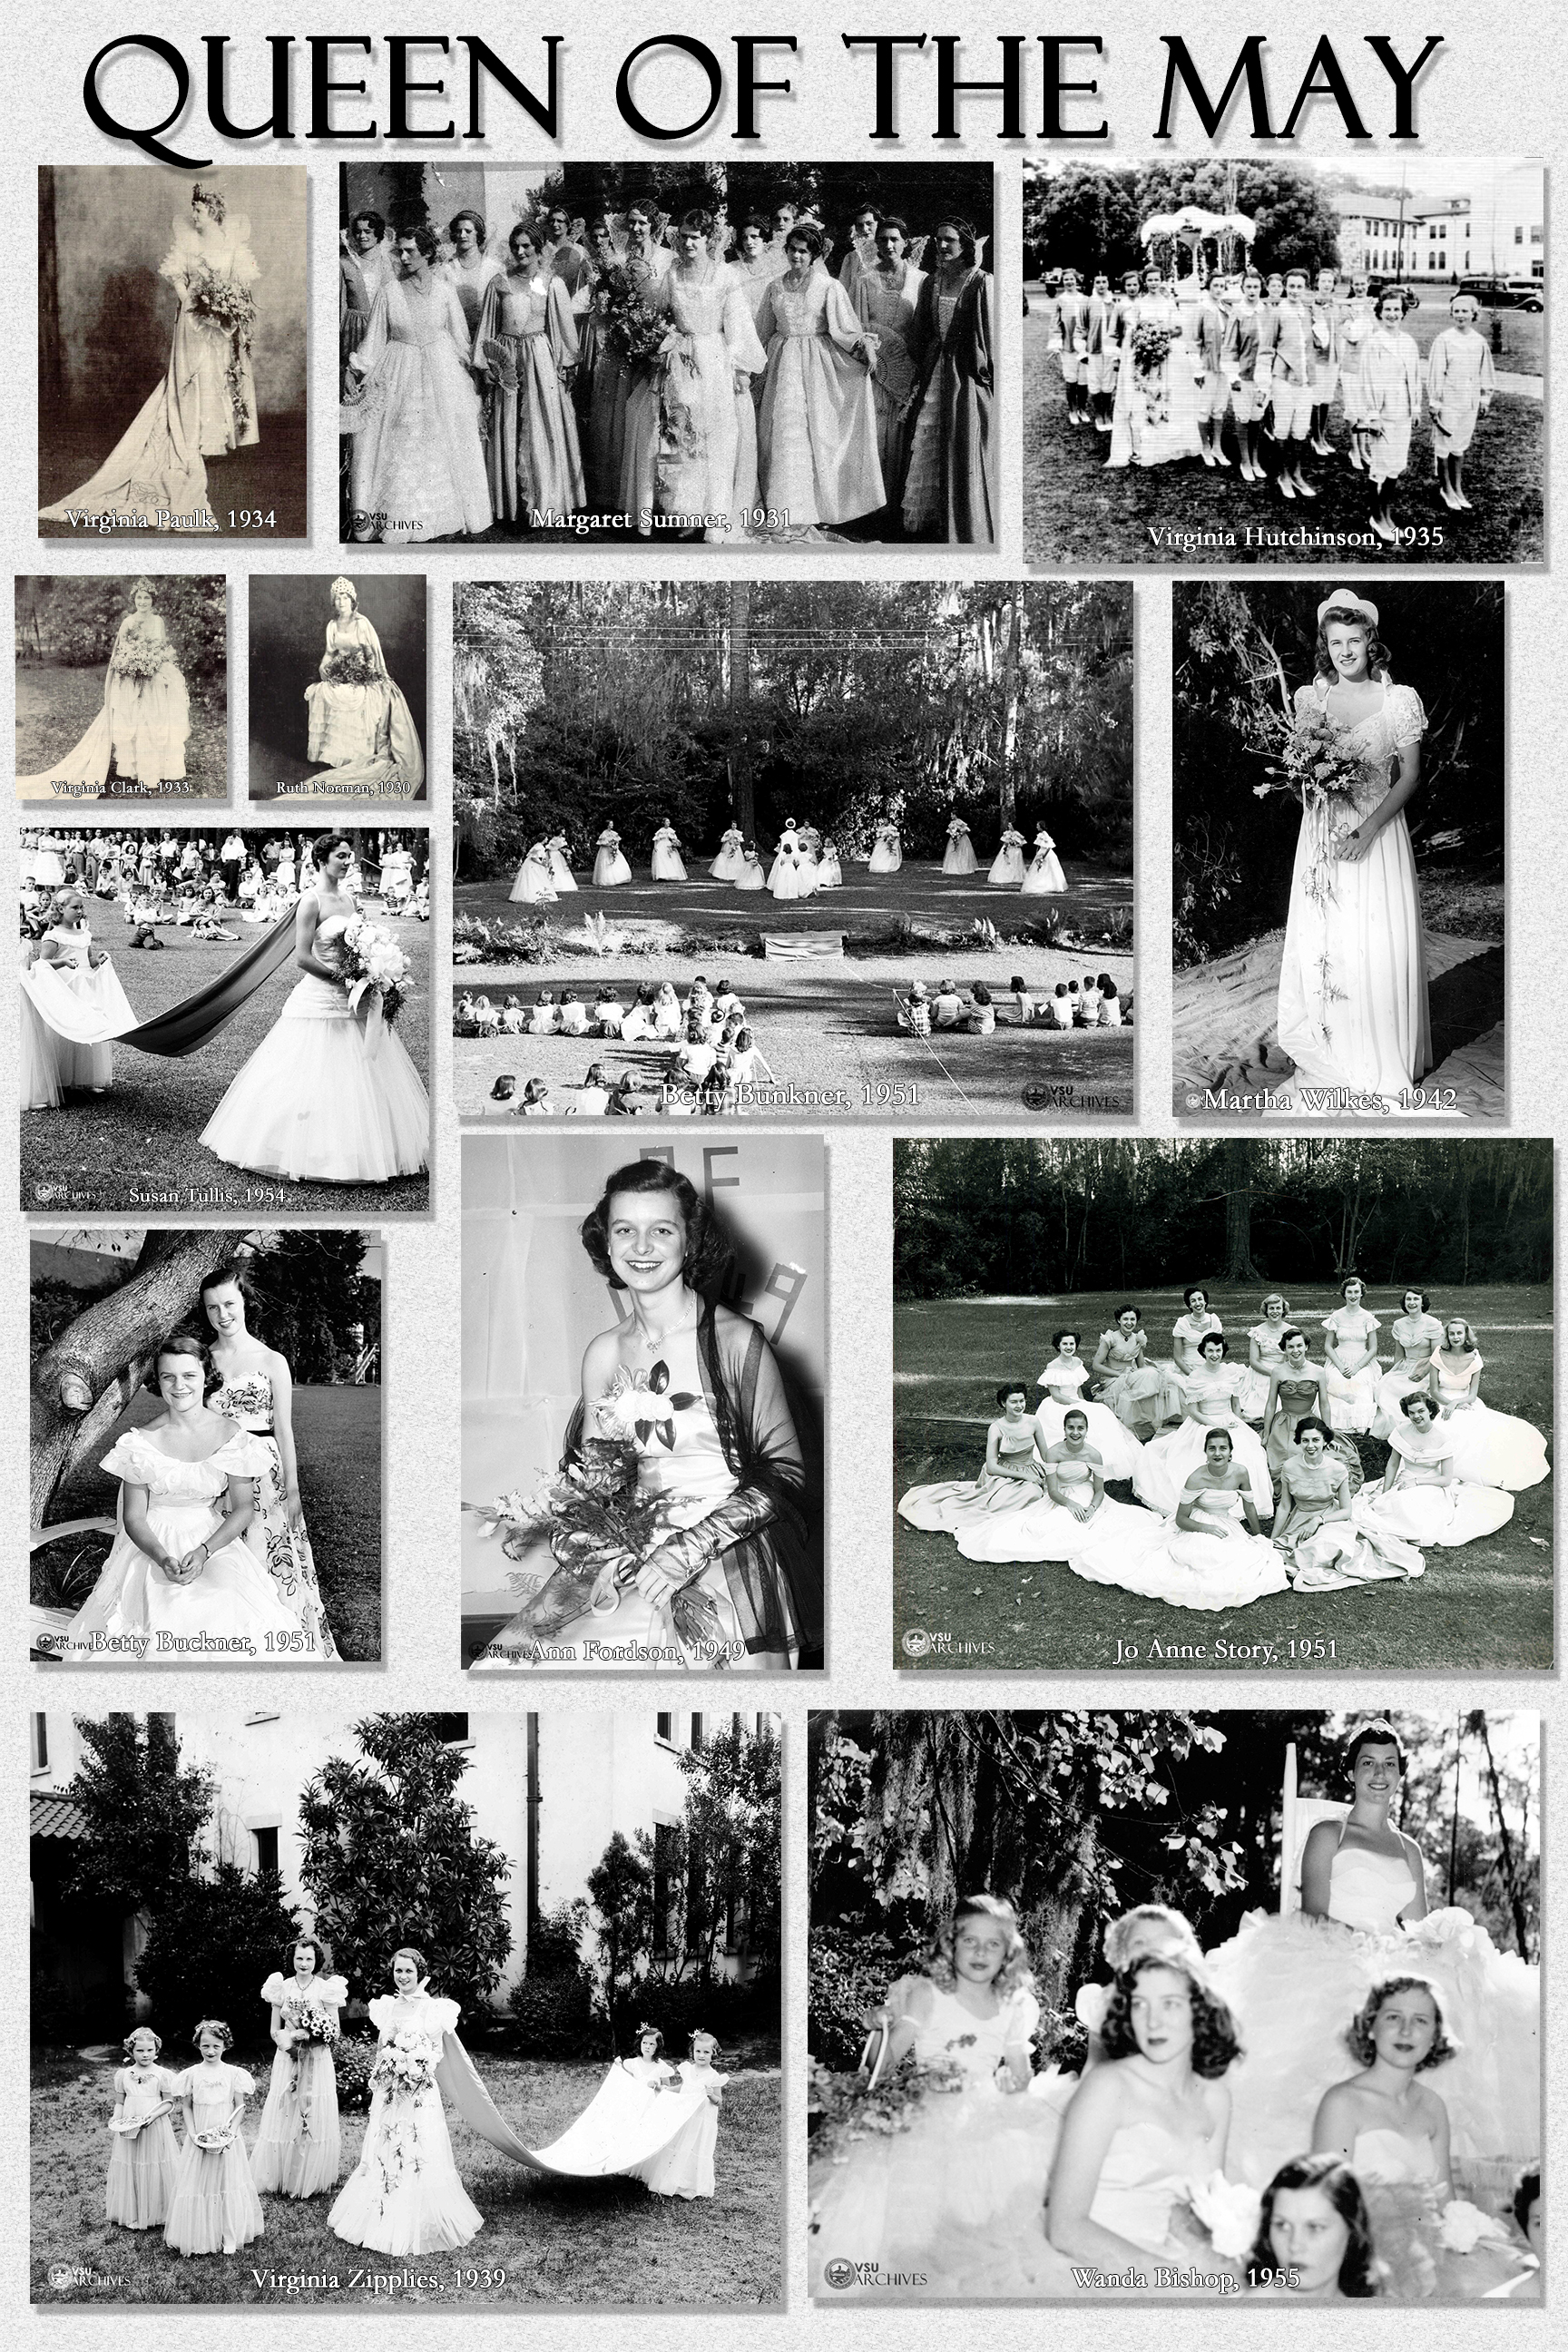 In addition to the selection of a theme and months of planning each May Day had a Queen who was chosen in March or April from the senior class by popular vote of the student body. The May Queen presided over the May Court which included a Maid of Honor, Ladies in Waiting, Flower Girls, and Train Bearers. The Court consisted of 12-14 girls from the student body but usually from the senior class. The Flower Girls and Train Bearers were often the children of grandchildren of alumnae.
                    Elaborate planning and detail went into the selection of the Queen’s dress and the dresses of her court. The May Queen’s dress was often white, but it was not uncommon to see the May Queen wearing bridal pink while the Maid of Honor wore cornflower blue. All carried flowers ranging
                    from Shasta daisies to talisman roses.
                    
                    The May Day ceremony officially started with the crowning of the May Queen, but the activities for the day actually started in the morning for the freshmen. By custom, the freshmen woke early to decorate the May Queen’s throne and its setting. After the coronation of the Queen, she was carried to her throne where she could watch alongside her court and guests, a colorful program of special dances honoring spring. “Both the peasants and the Lords and Ladies dance during the festivities. To the strains of frivolous music, dainty maidens, and strolling players pay homage to their Queen with dances, pantomimes, and foolish capers. The country folk dance their hearty, vibrant dances and the Lords and Ladies descend from the throne of the May Queen to dance the minuet on the green.” (Pinecone, 1934).
                    Due to wartime conditions and restrictions, the annual Play Day-May Day event was discontinued after the 1942 celebration. From 1943-1947, the College started a new tradition of a Spring Festival which was held in March to allow visitors the opportunity to enjoy the spring blooms of a2aleas, dogwoods, and the red buds on campus.
                    Play Day-May Day resumed in 1948. The last Play Day-May Day combination was held in 195. In 1956, one of the last traditional May Day celebration included an Honor’s Day ceremony.
                    In the early 1990’s, May Day Celebrations were held by the Valdosta State University Music Society at the spring outdoor Wind Ensemble concert.
                    They were staged in the Fine Arts Amphitheater, and each one featured a May Queen, Ladies in Waiting, and Train Bearers. The Queen and her court presided over the festivities and the wrapping of the May pole.
                    